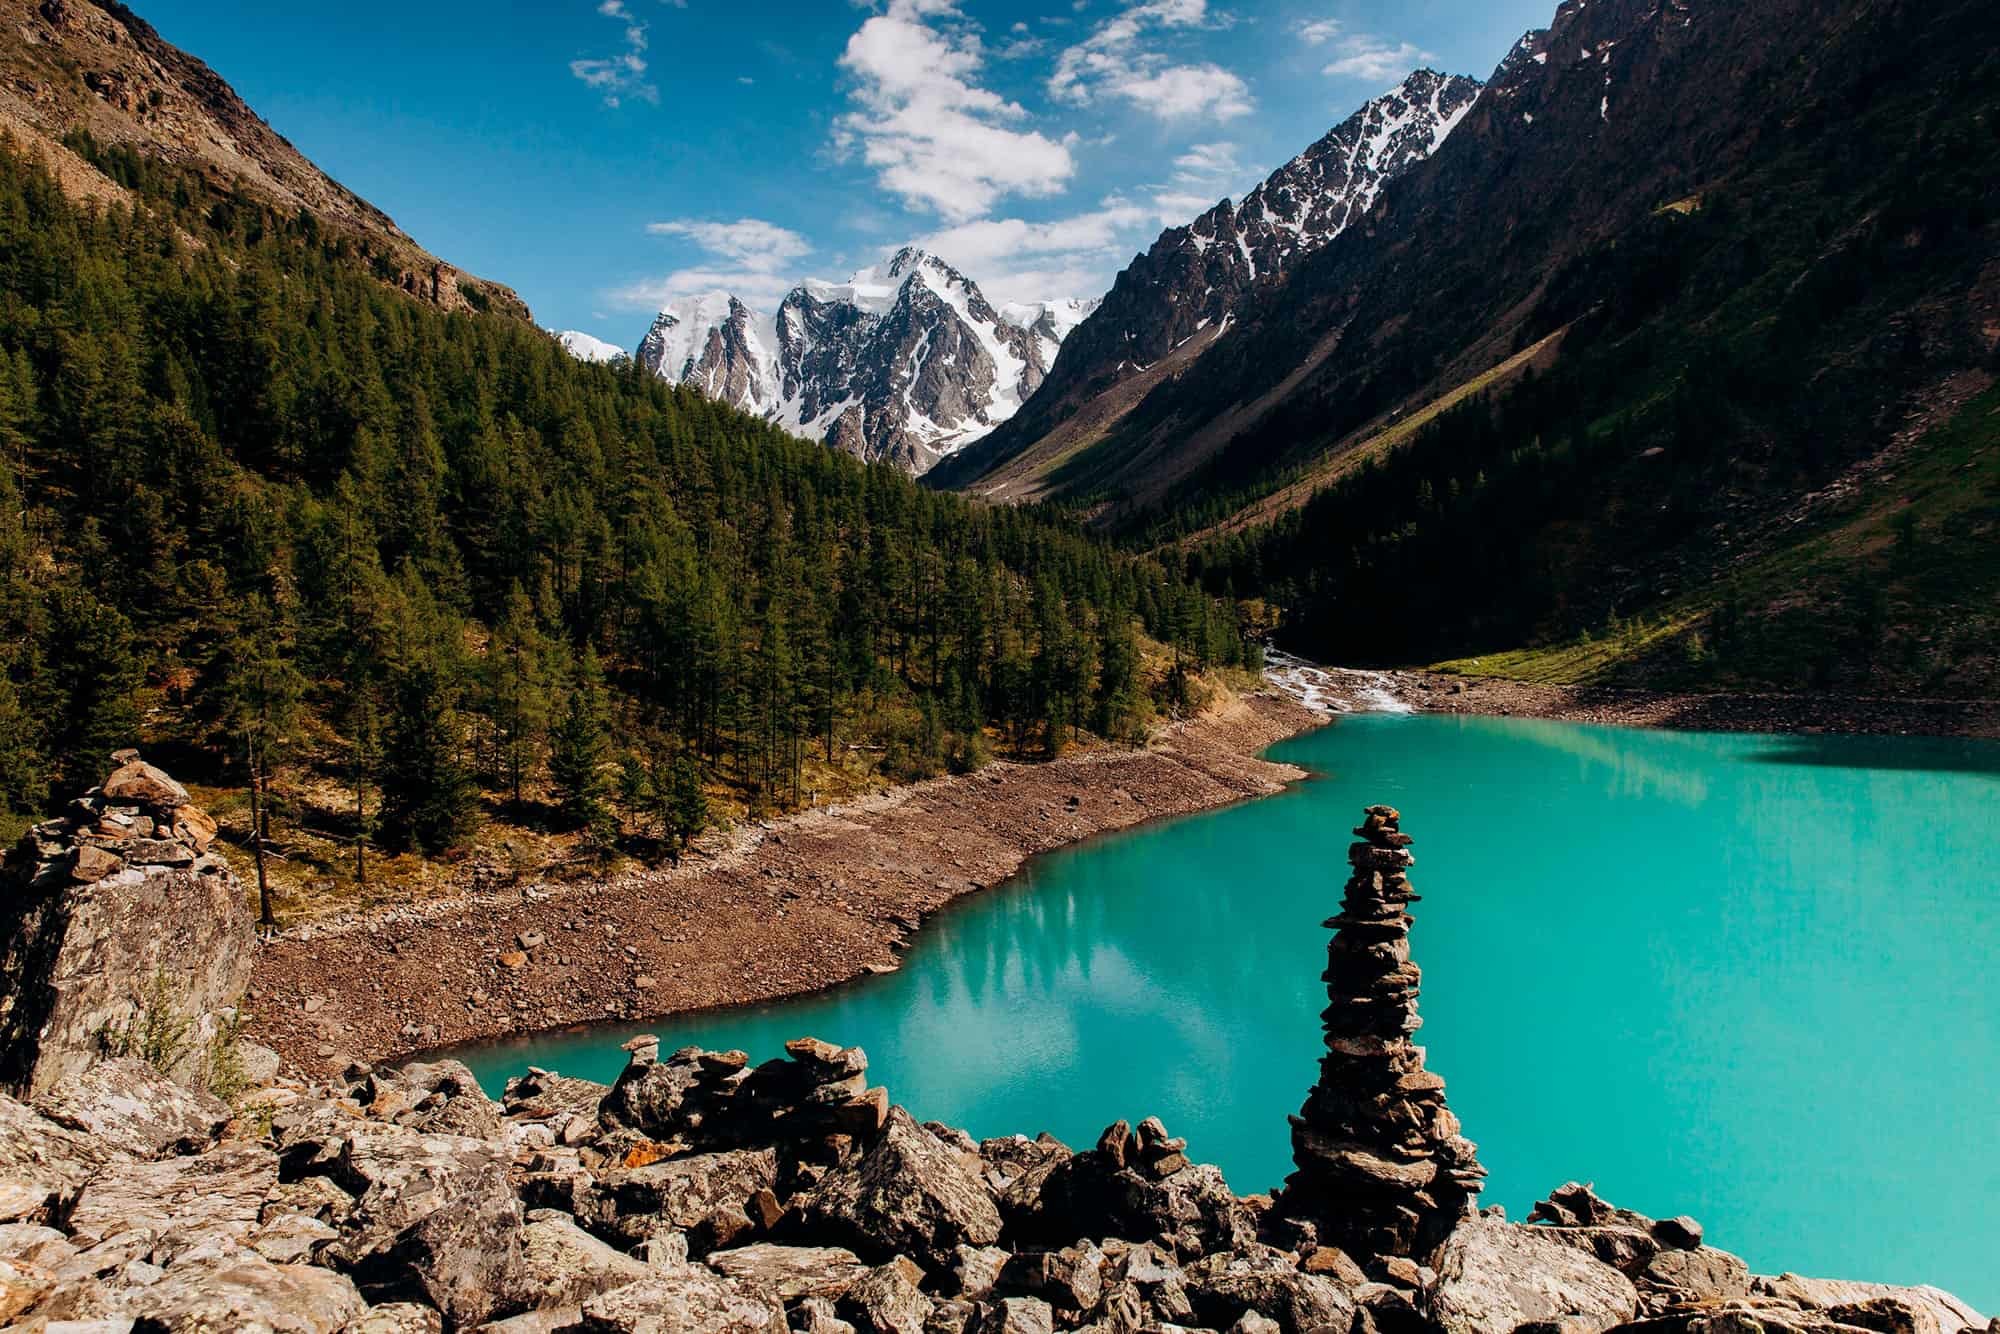 The Altai Mountains Tour 2021 — Chuysky Tract With Russiadiscovery